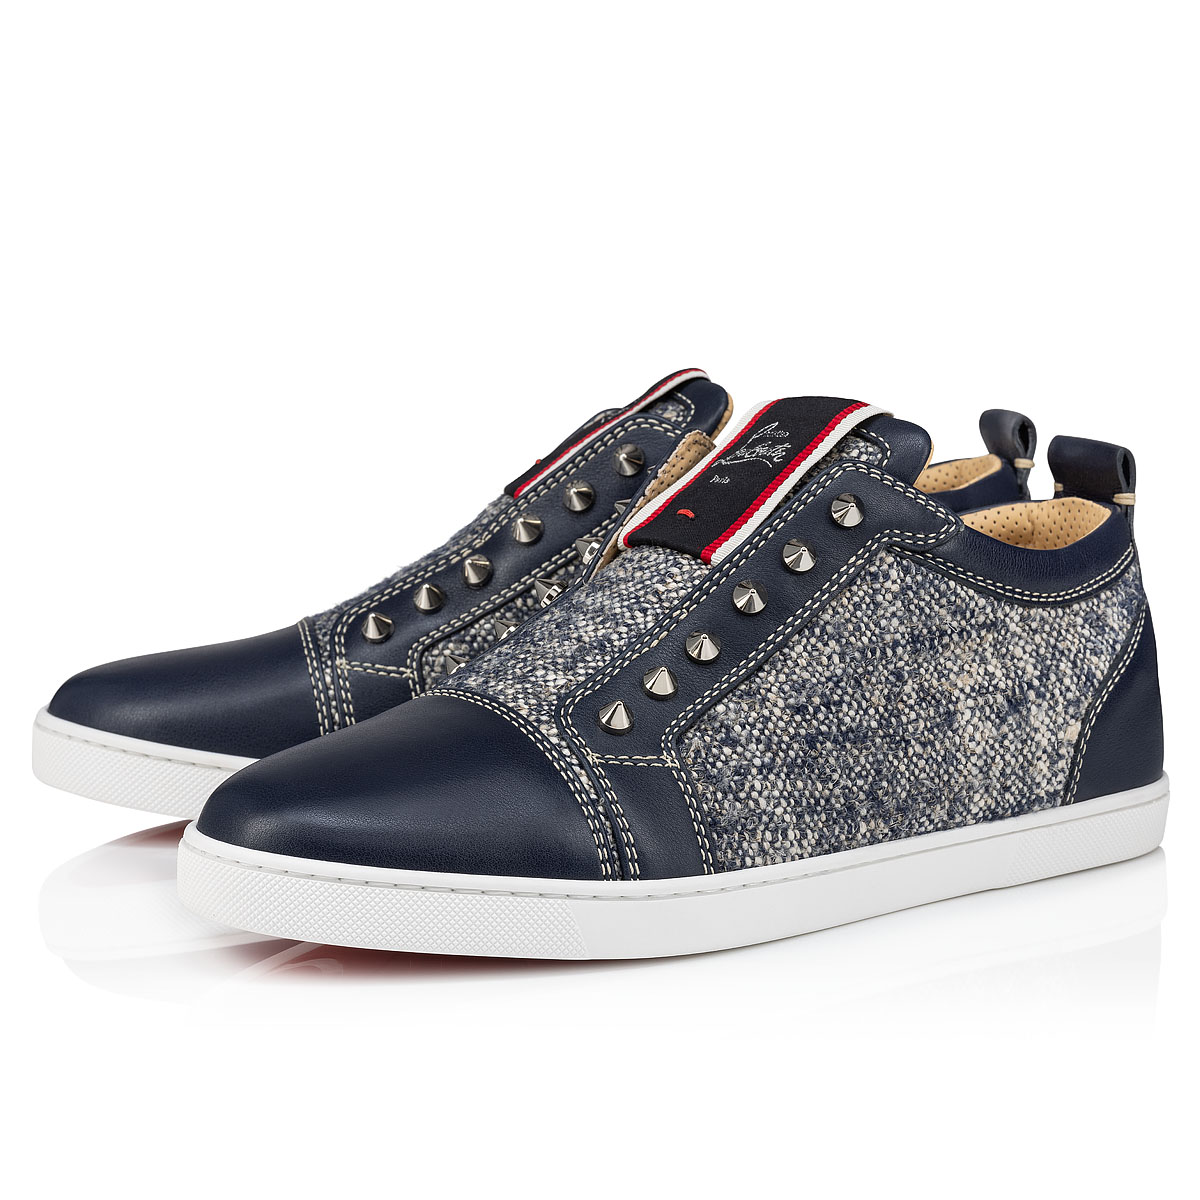 F.A.V Fique A Vontade and Christian Louboutin Wool United - States calf leather Sneakers - - - Navy